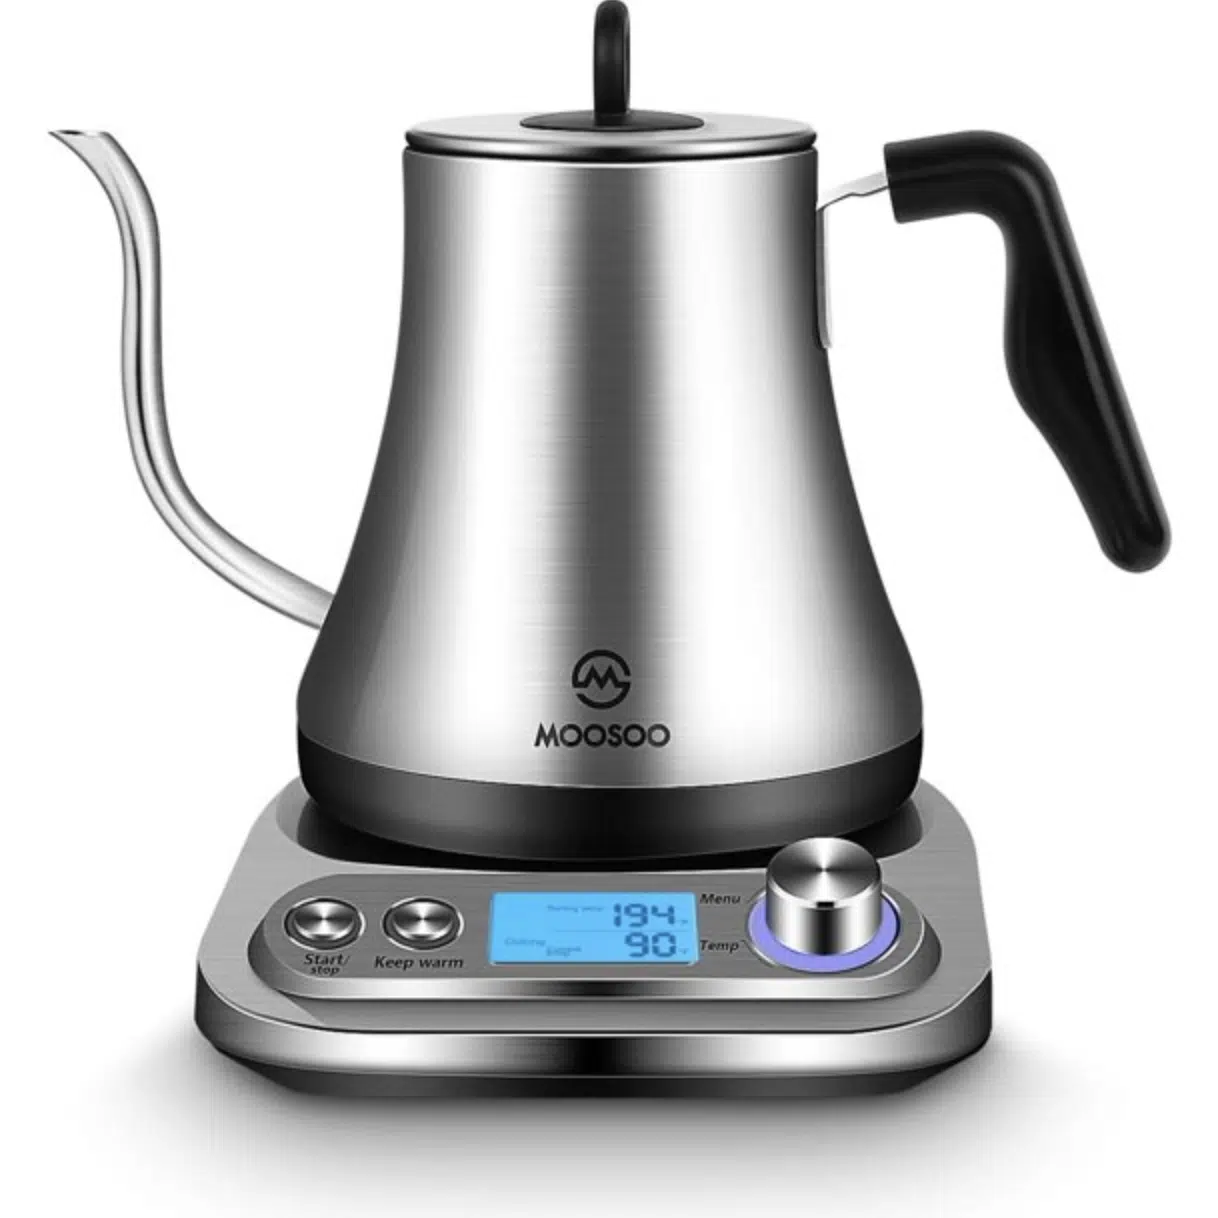 How To Choose A Gooseneck Kettle For Pour Over Coffee – Rogue Wave